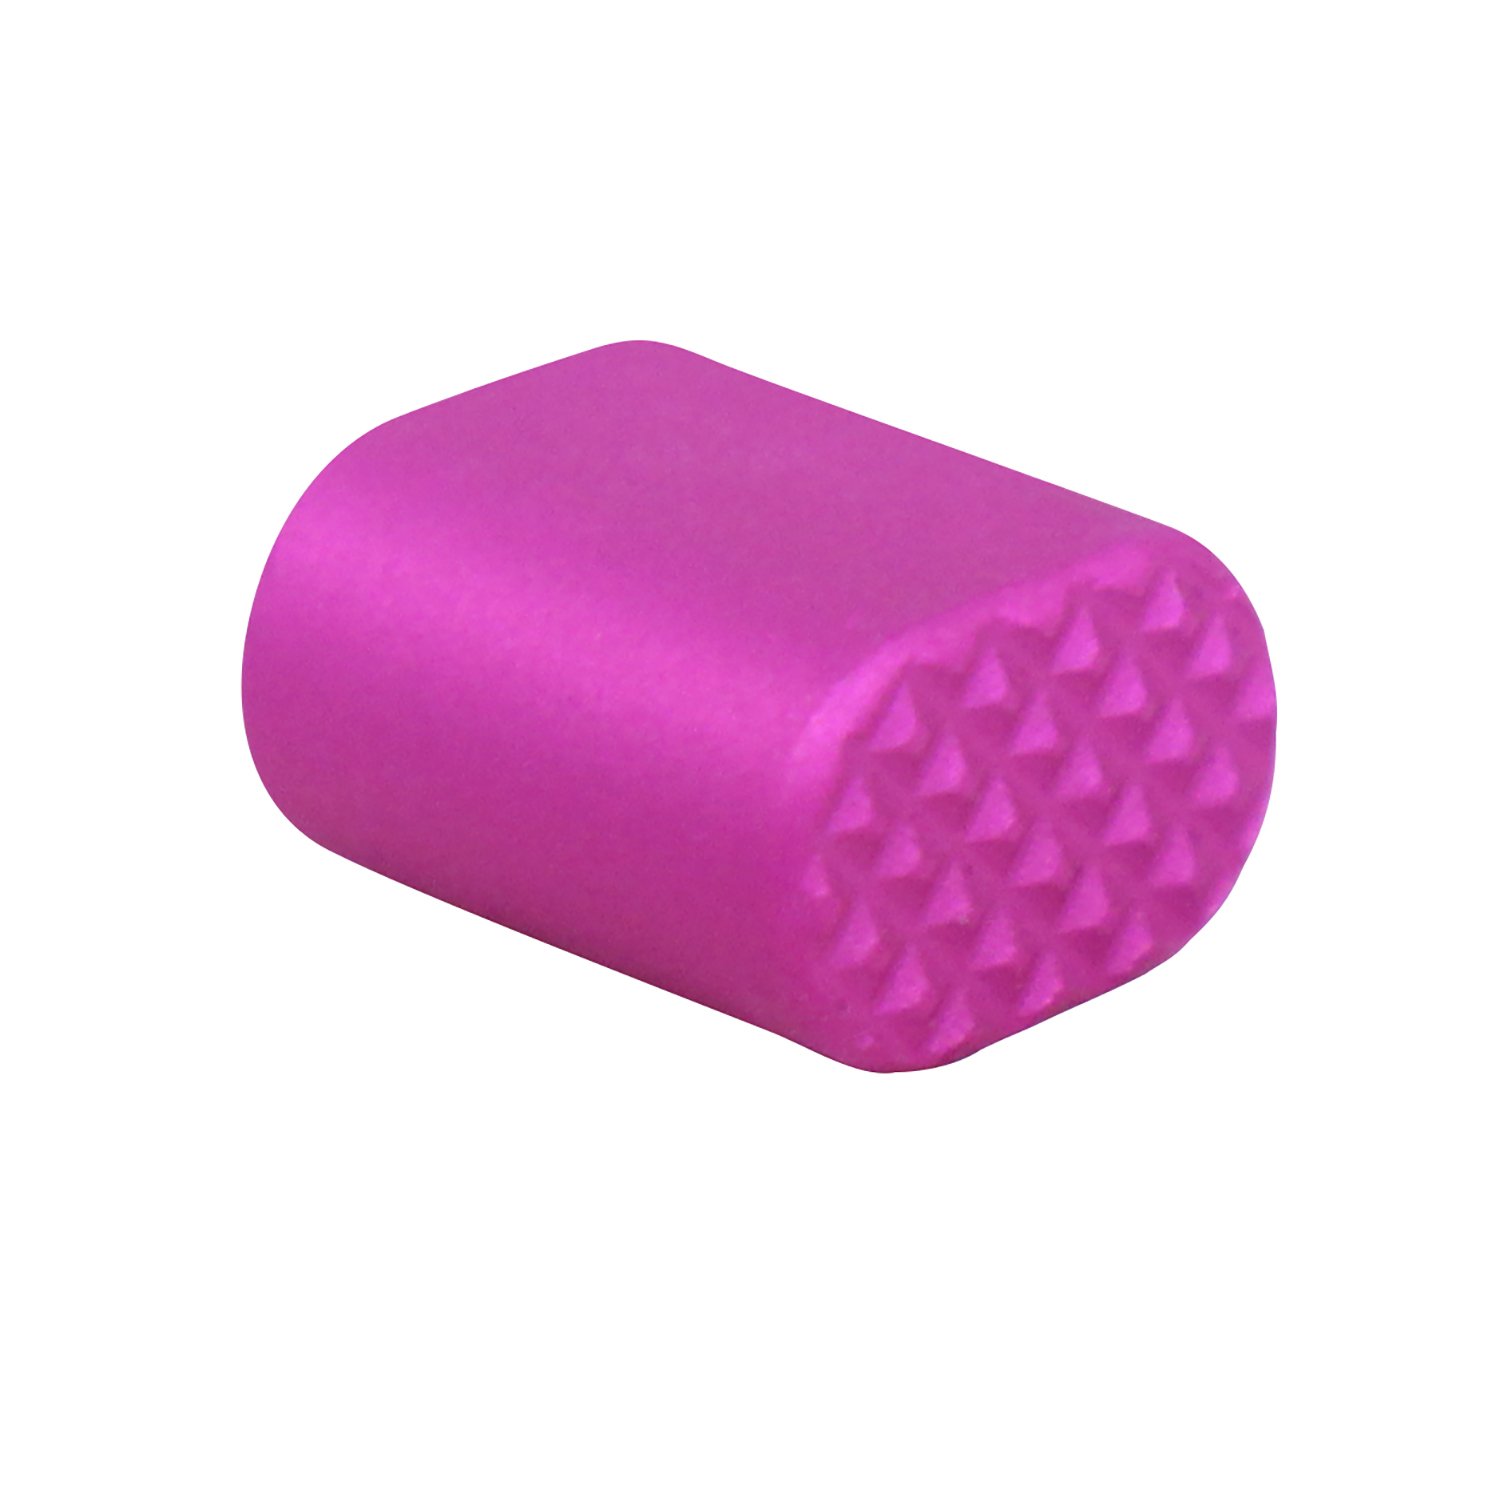 AR-15 Extended Mag Button in Anodized Pink